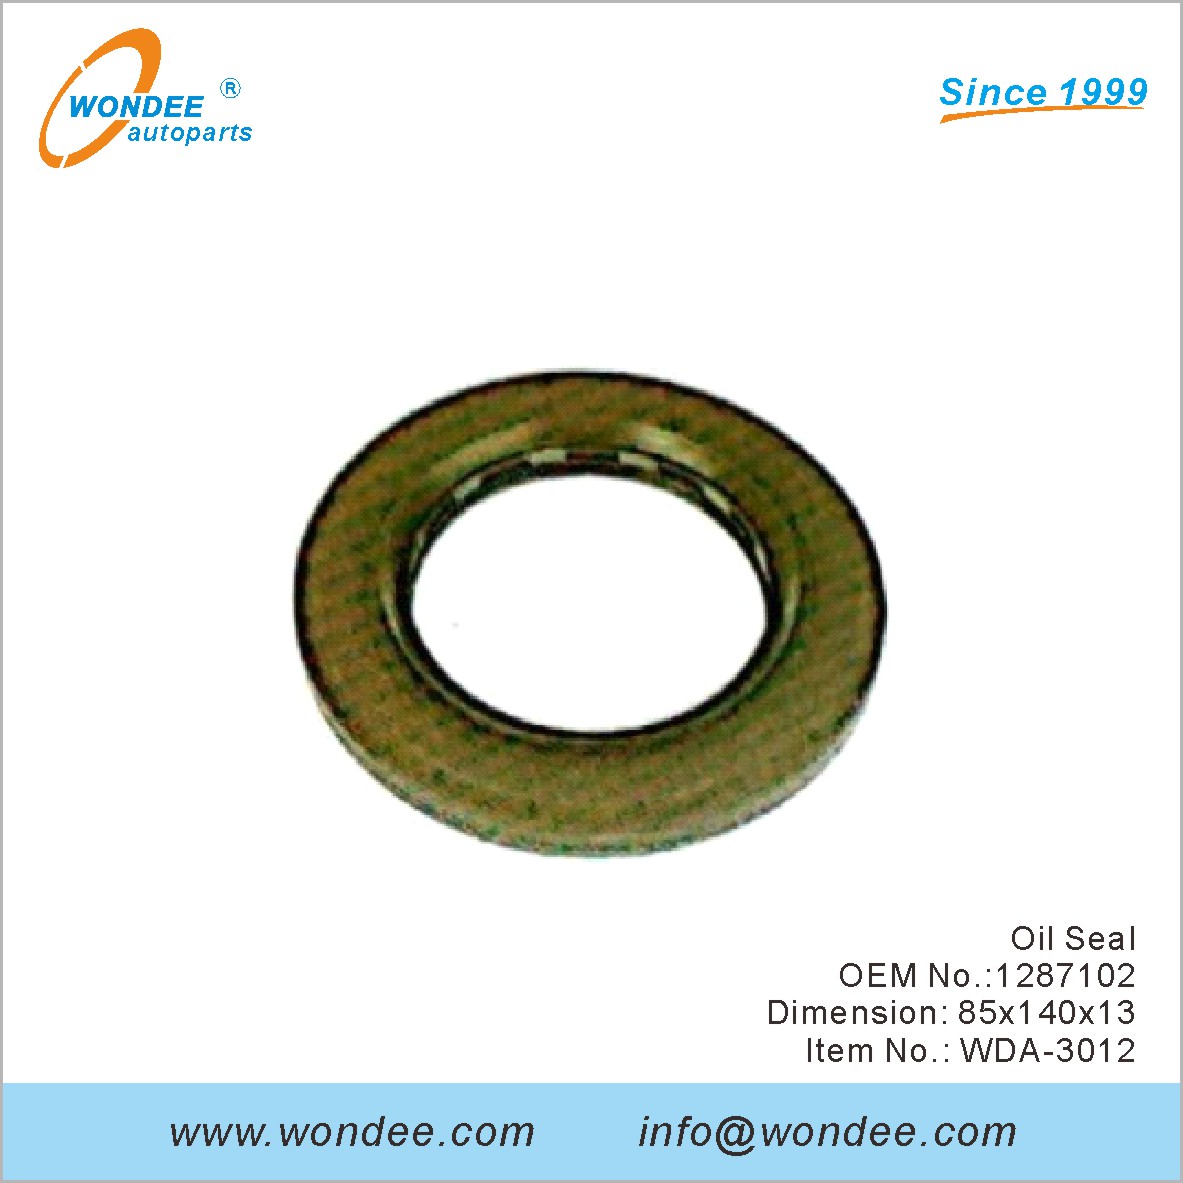 Oil Seal OEM 1287102 for DAF from WONDEE 85x140x13